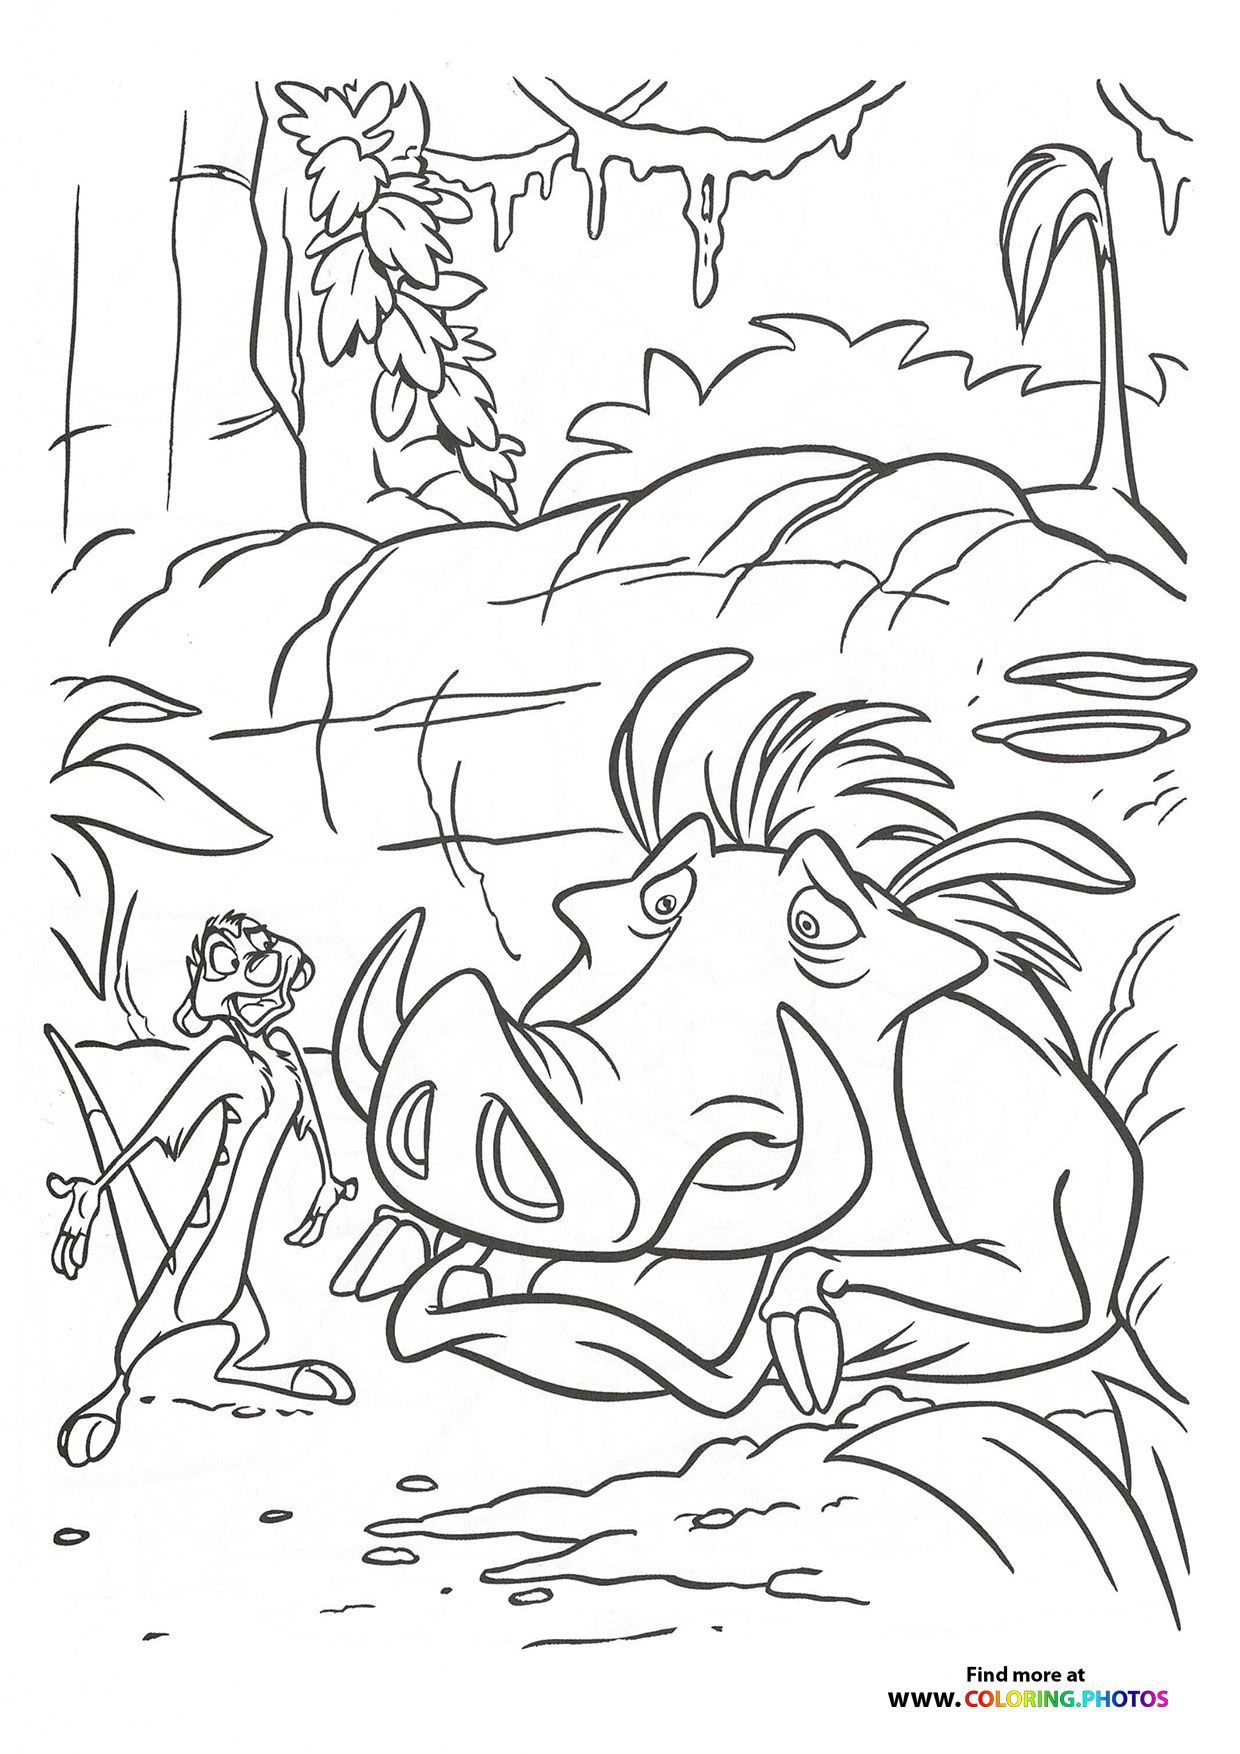 Simba Timon and Pumba dancing - Coloring Pages for kids